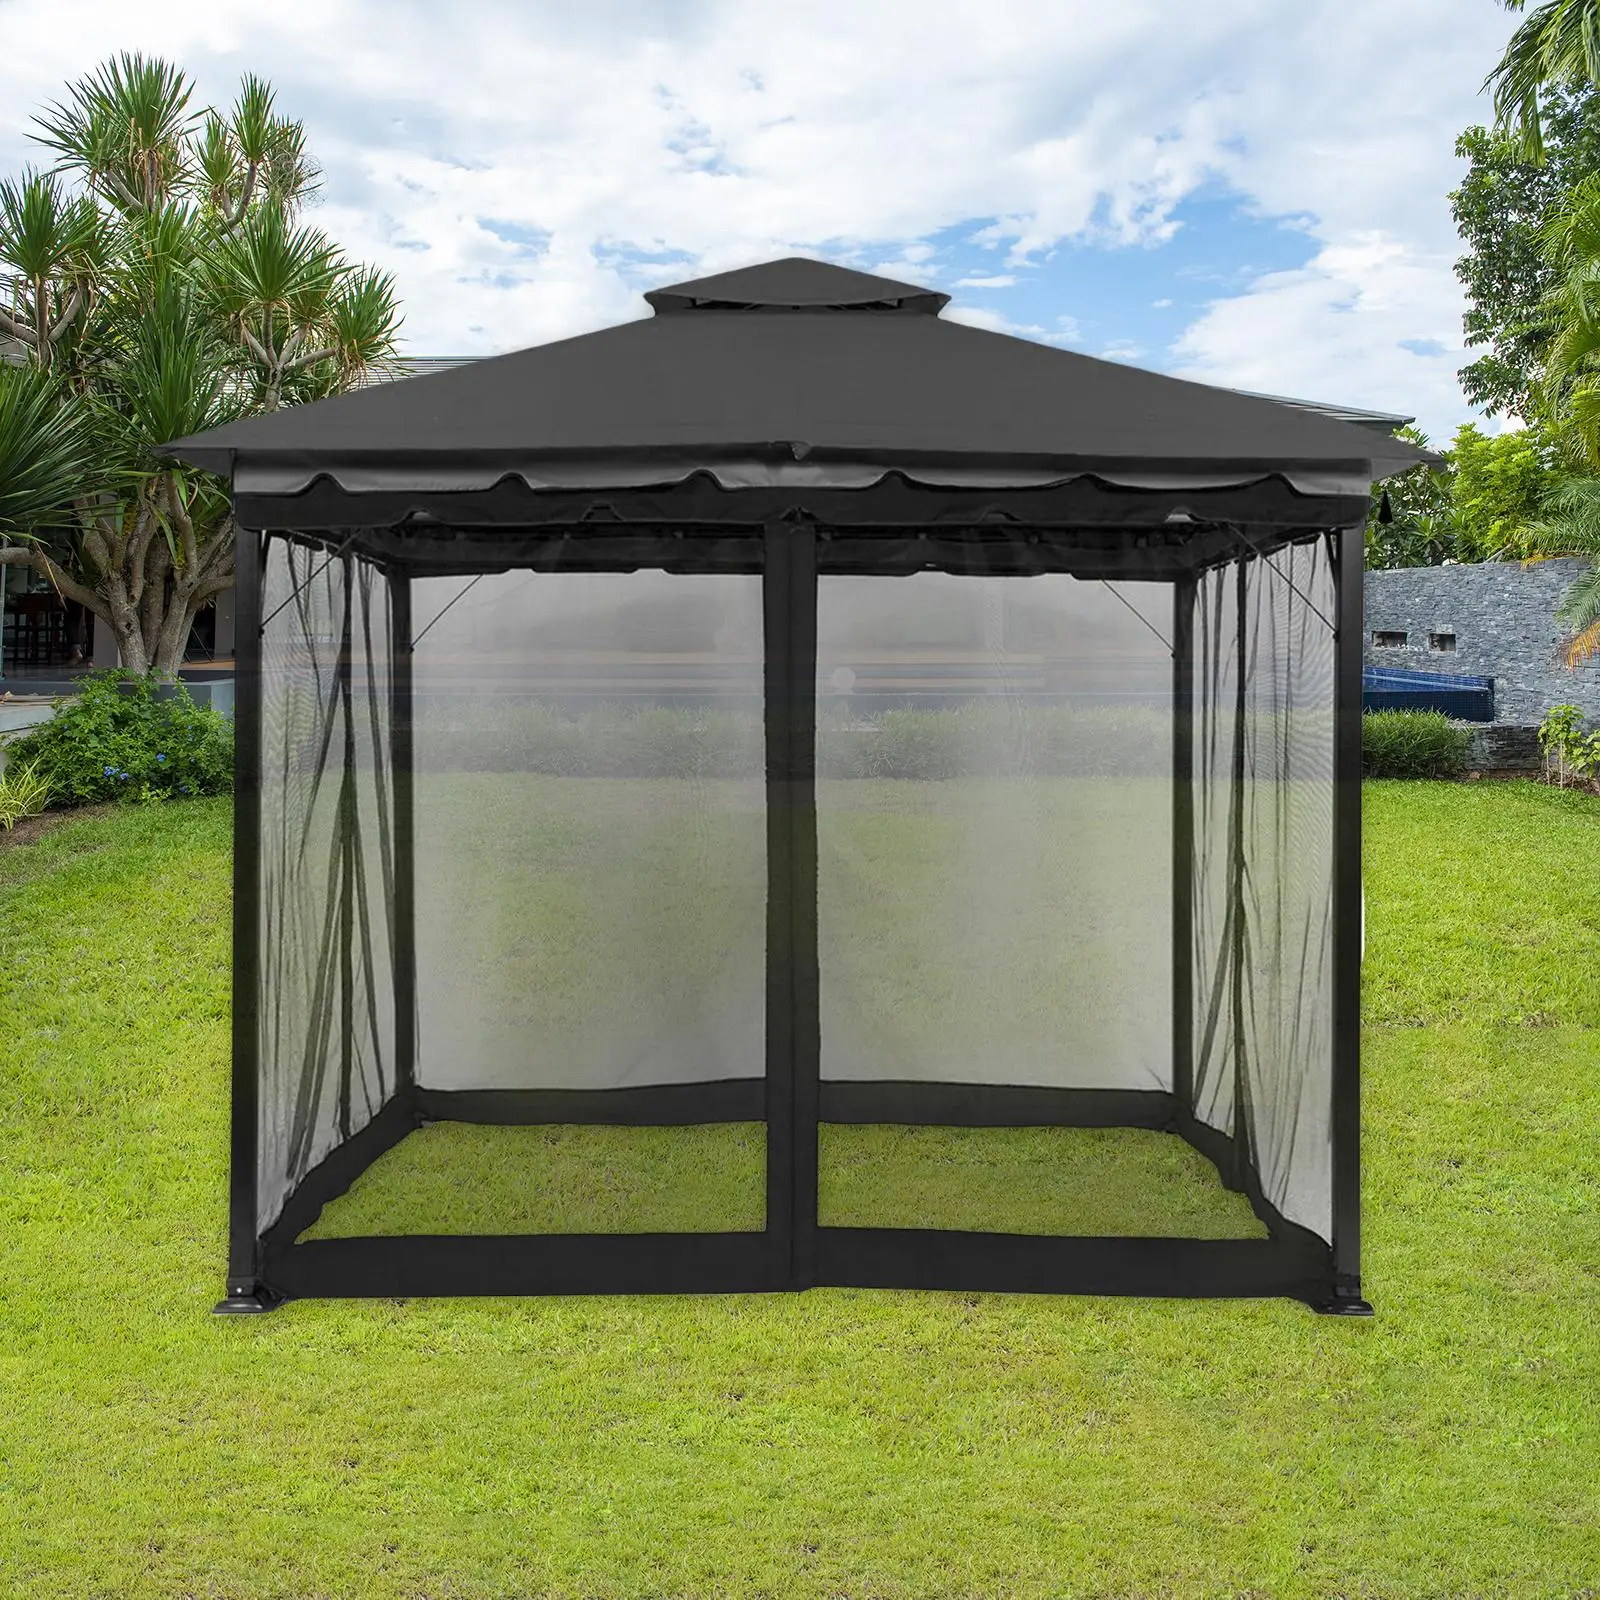 Outside Canopy Large Four Corners Portable Camping Outdoor Gazebo Netting